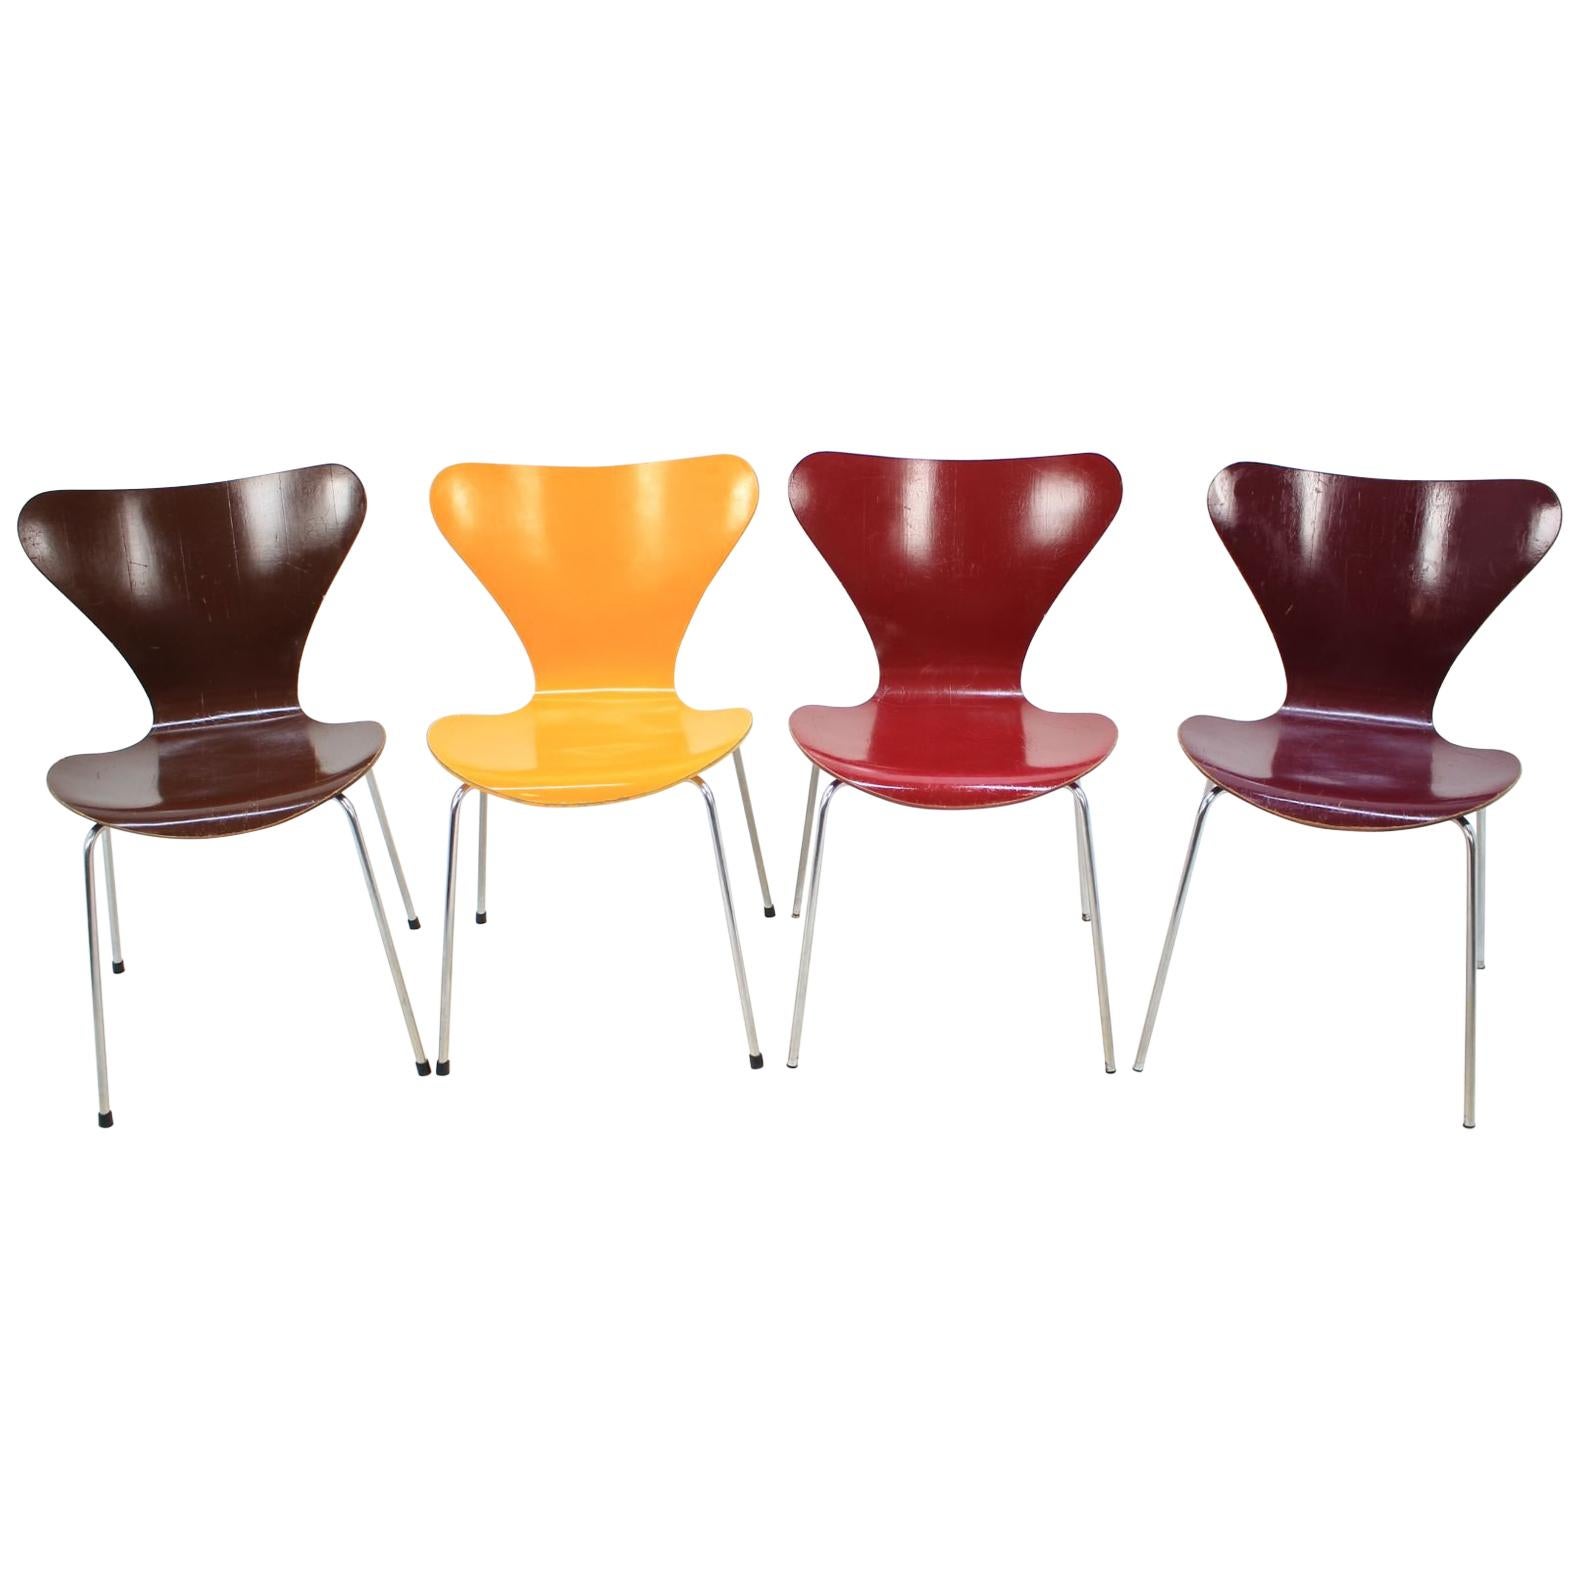 Set of Four Midcentury Iconic Chairs Arne Jacobsen for Fritz Hansen, Series 7